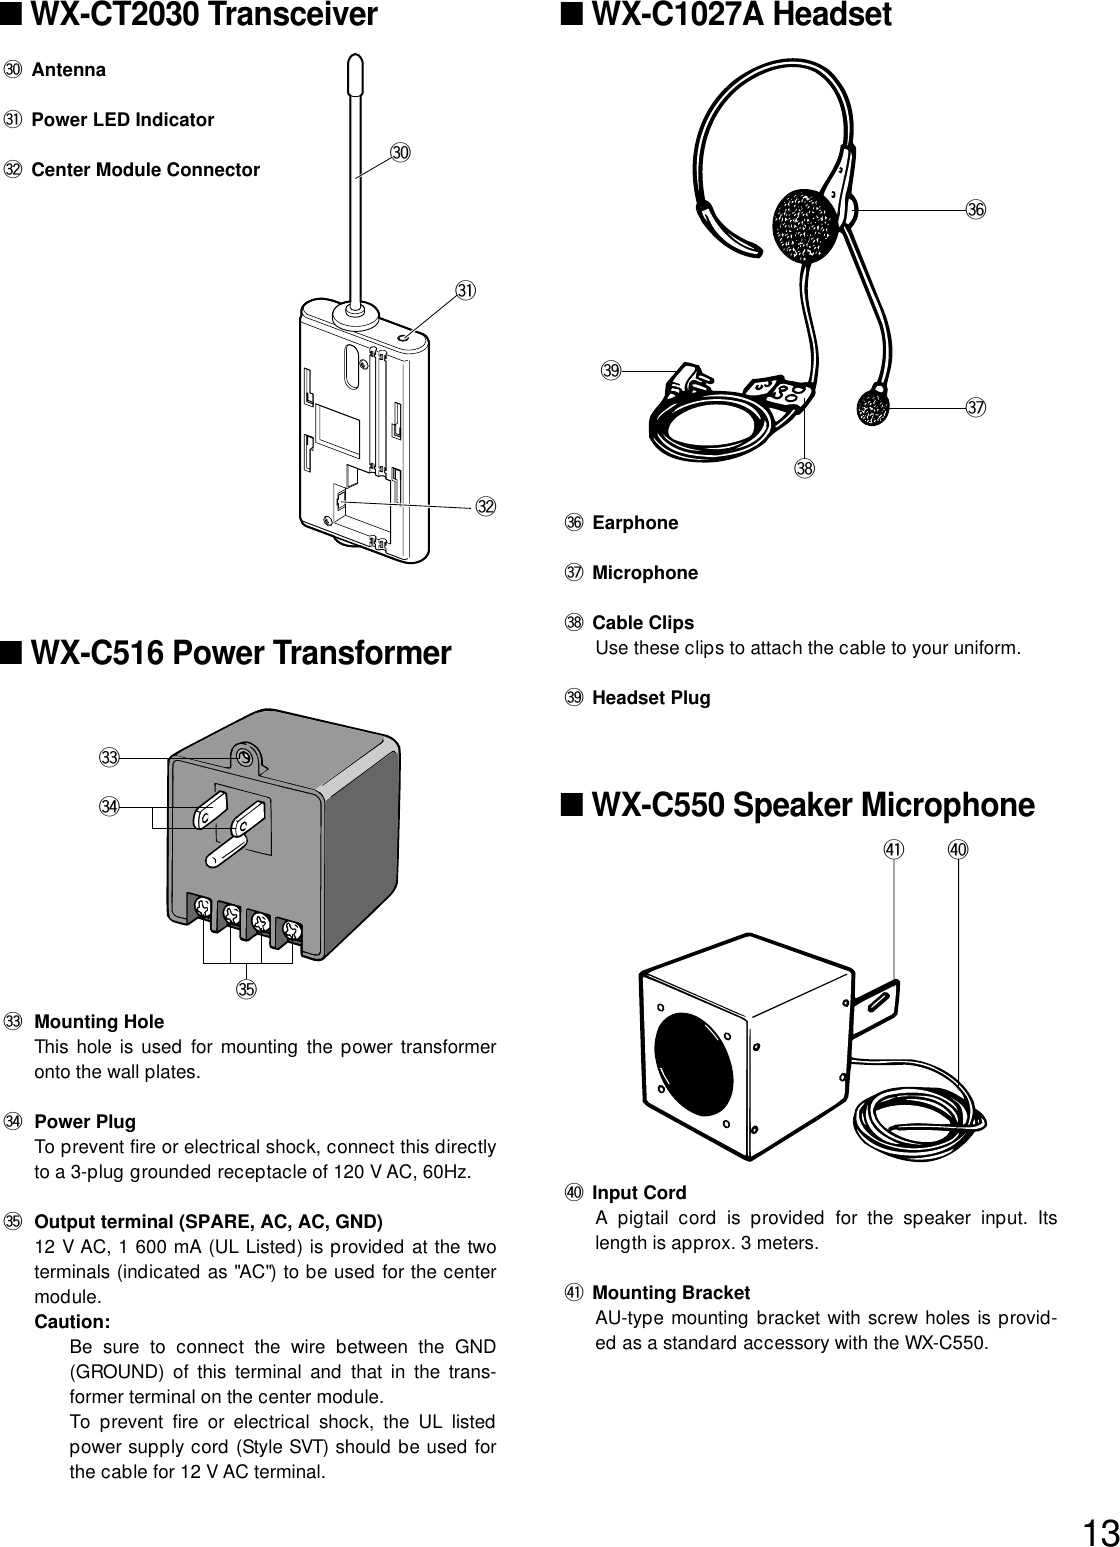 13■WX-CT2030 Transceiver#0 Antenna#1 Power LED Indicator#2 Center Module Connector■WX-C516 Power Transformer#3 Mounting Hole This hole is used for mounting the power transformeronto the wall plates.#4 Power PlugTo prevent fire or electrical shock, connect this directlyto a 3-plug grounded receptacle of 120 V AC, 60Hz.#5 Output terminal (SPARE, AC, AC, GND)12 V AC, 1 600 mA (UL Listed) is provided at the twoterminals (indicated as &quot;AC&quot;) to be used for the centermodule.Caution:Be sure to connect the wire between the GND(GROUND) of this terminal and that in the trans-former terminal on the center module.To prevent fire or electrical shock, the UL listedpower supply cord (Style SVT) should be used forthe cable for 12 V AC terminal.■WX-C1027A Headset#6 Earphone#7 Microphone#8 Cable ClipsUse these clips to attach the cable to your uniform.#9 Headset Plug■WX-C550 Speaker Microphone$0$1#3#4#5#6#7#8#9#0#1#2$0 Input Cord A pigtail cord is provided for the speaker input. Itslength is approx. 3 meters.$1 Mounting BracketAU-type mounting bracket with screw holes is provid-ed as a standard accessory with the WX-C550.